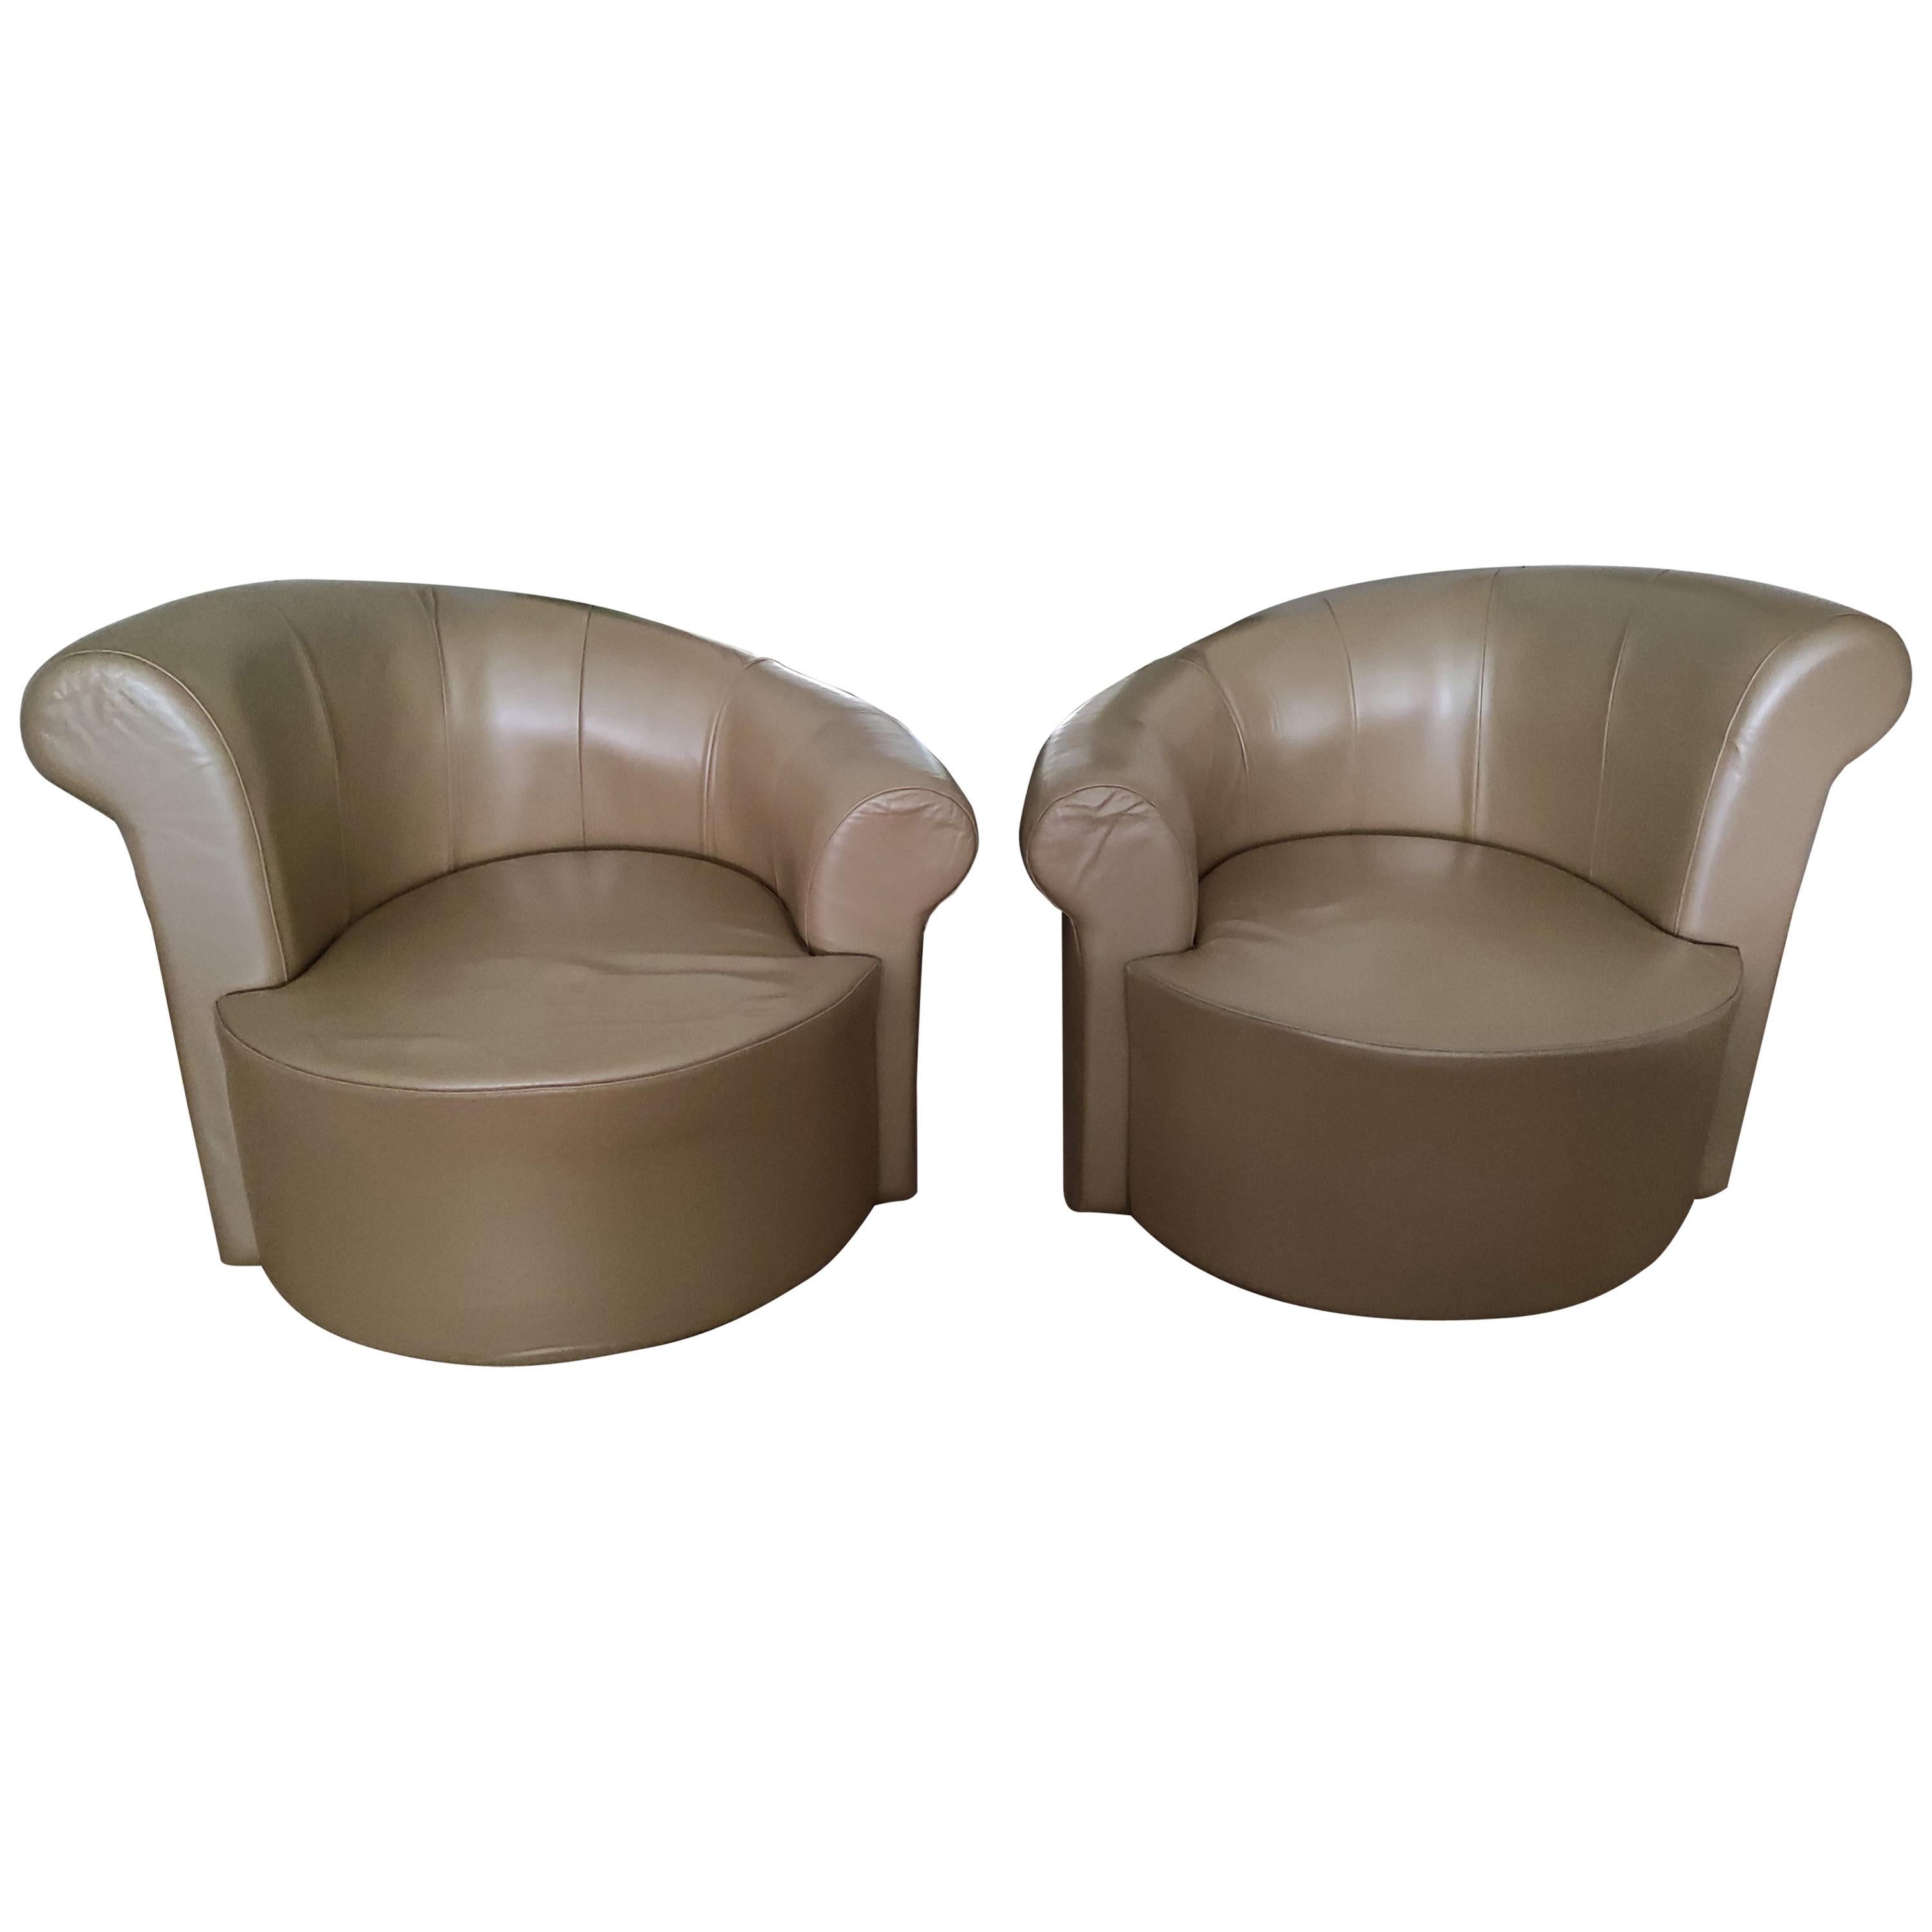 Pair of Swiveling "Nautilus" Chairs by Vladimir Kagan For Sale